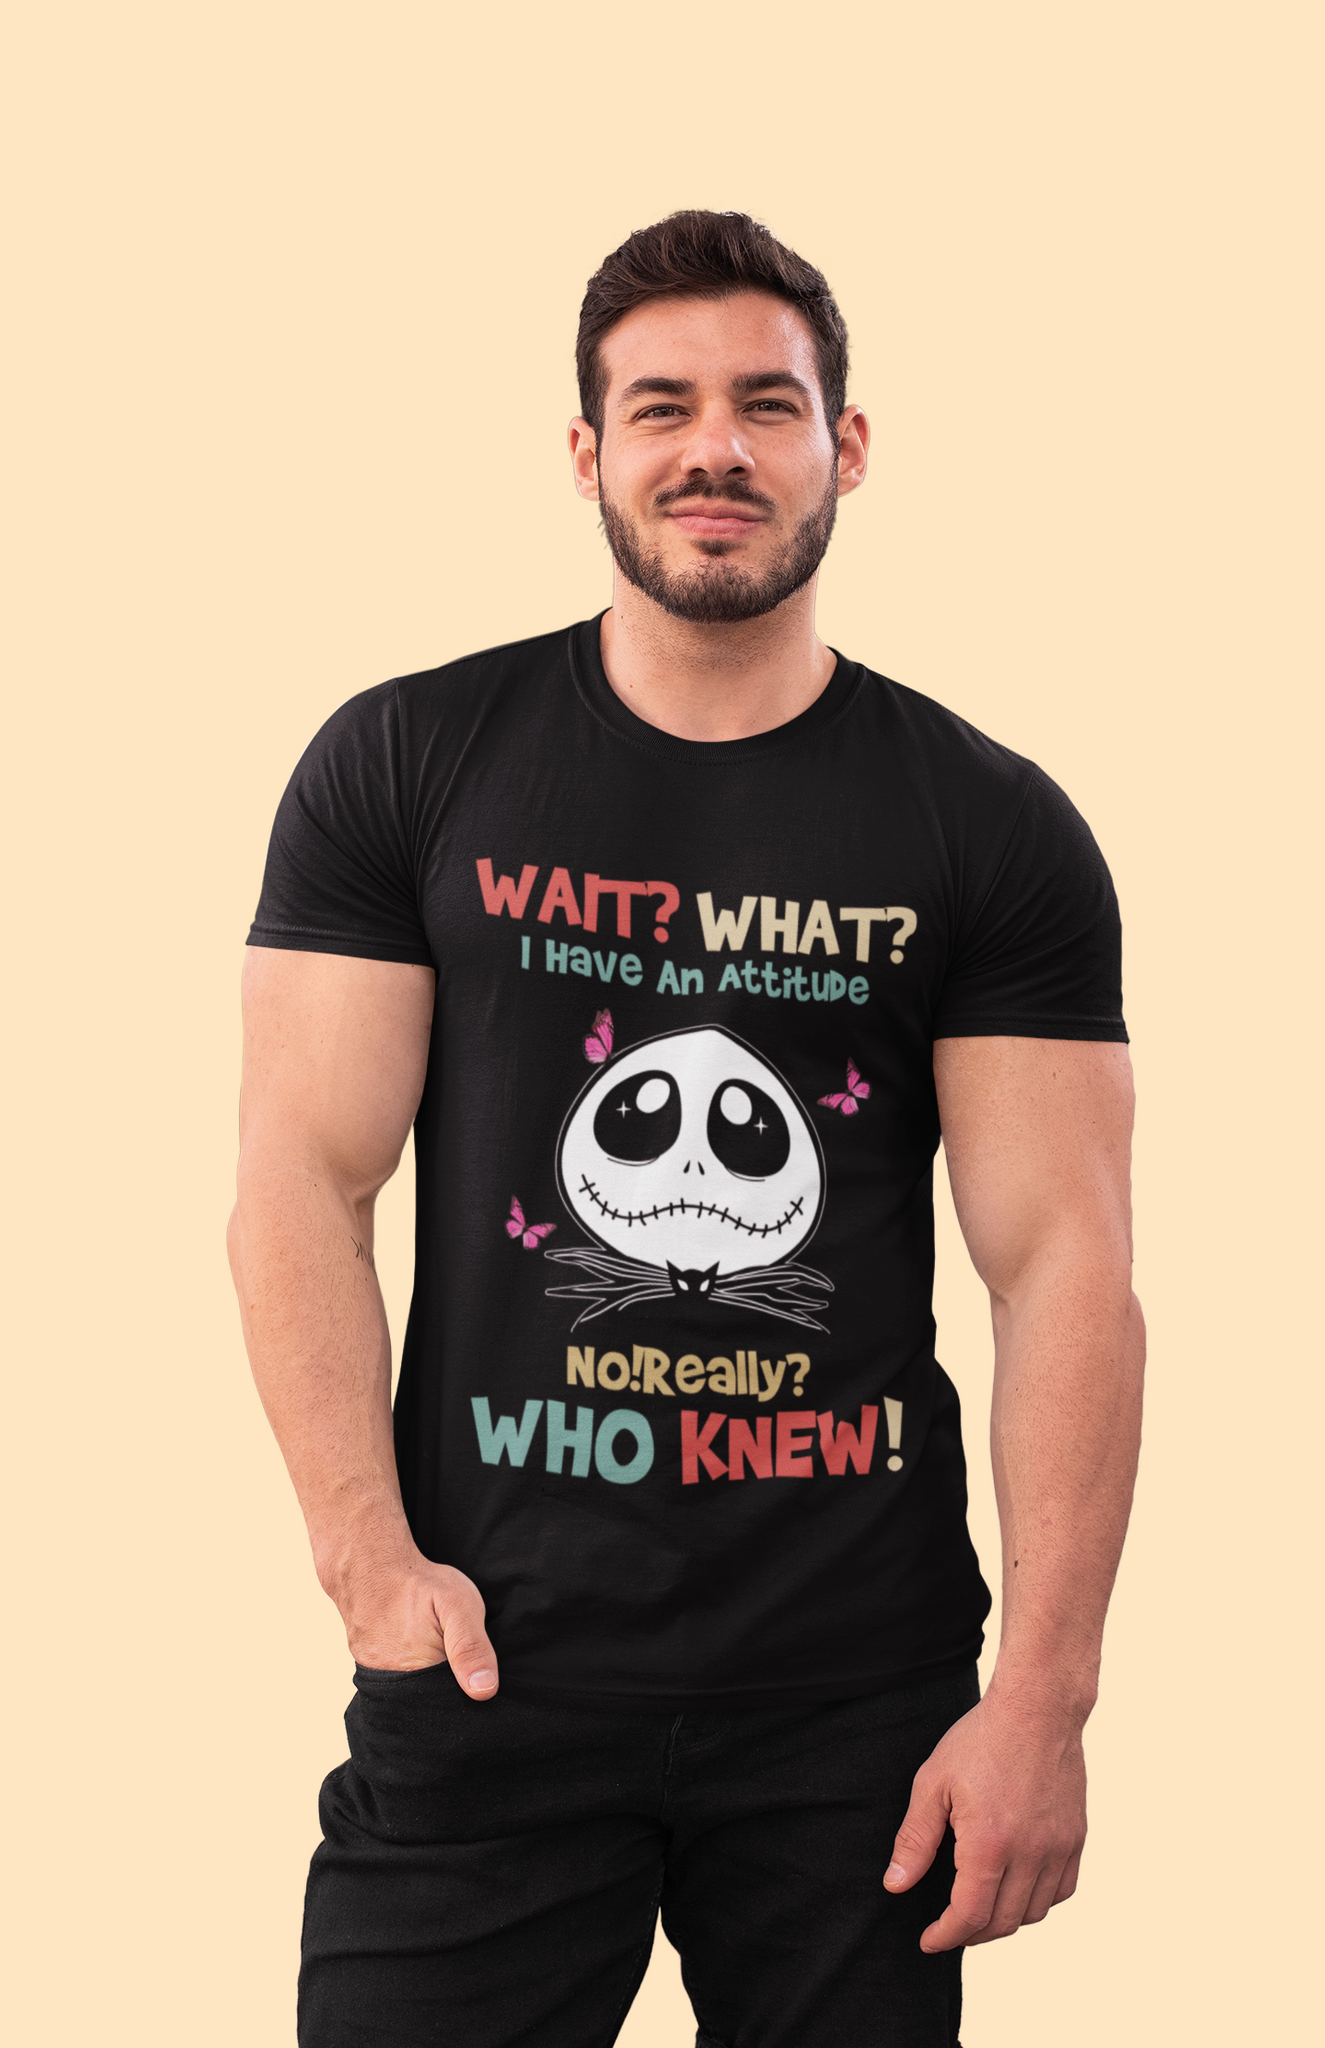 Nightmare Before Christmas T Shirt, Wait What I Have An Attitude Tshirt, Jack Skellington T Shirt, Halloween Gifts